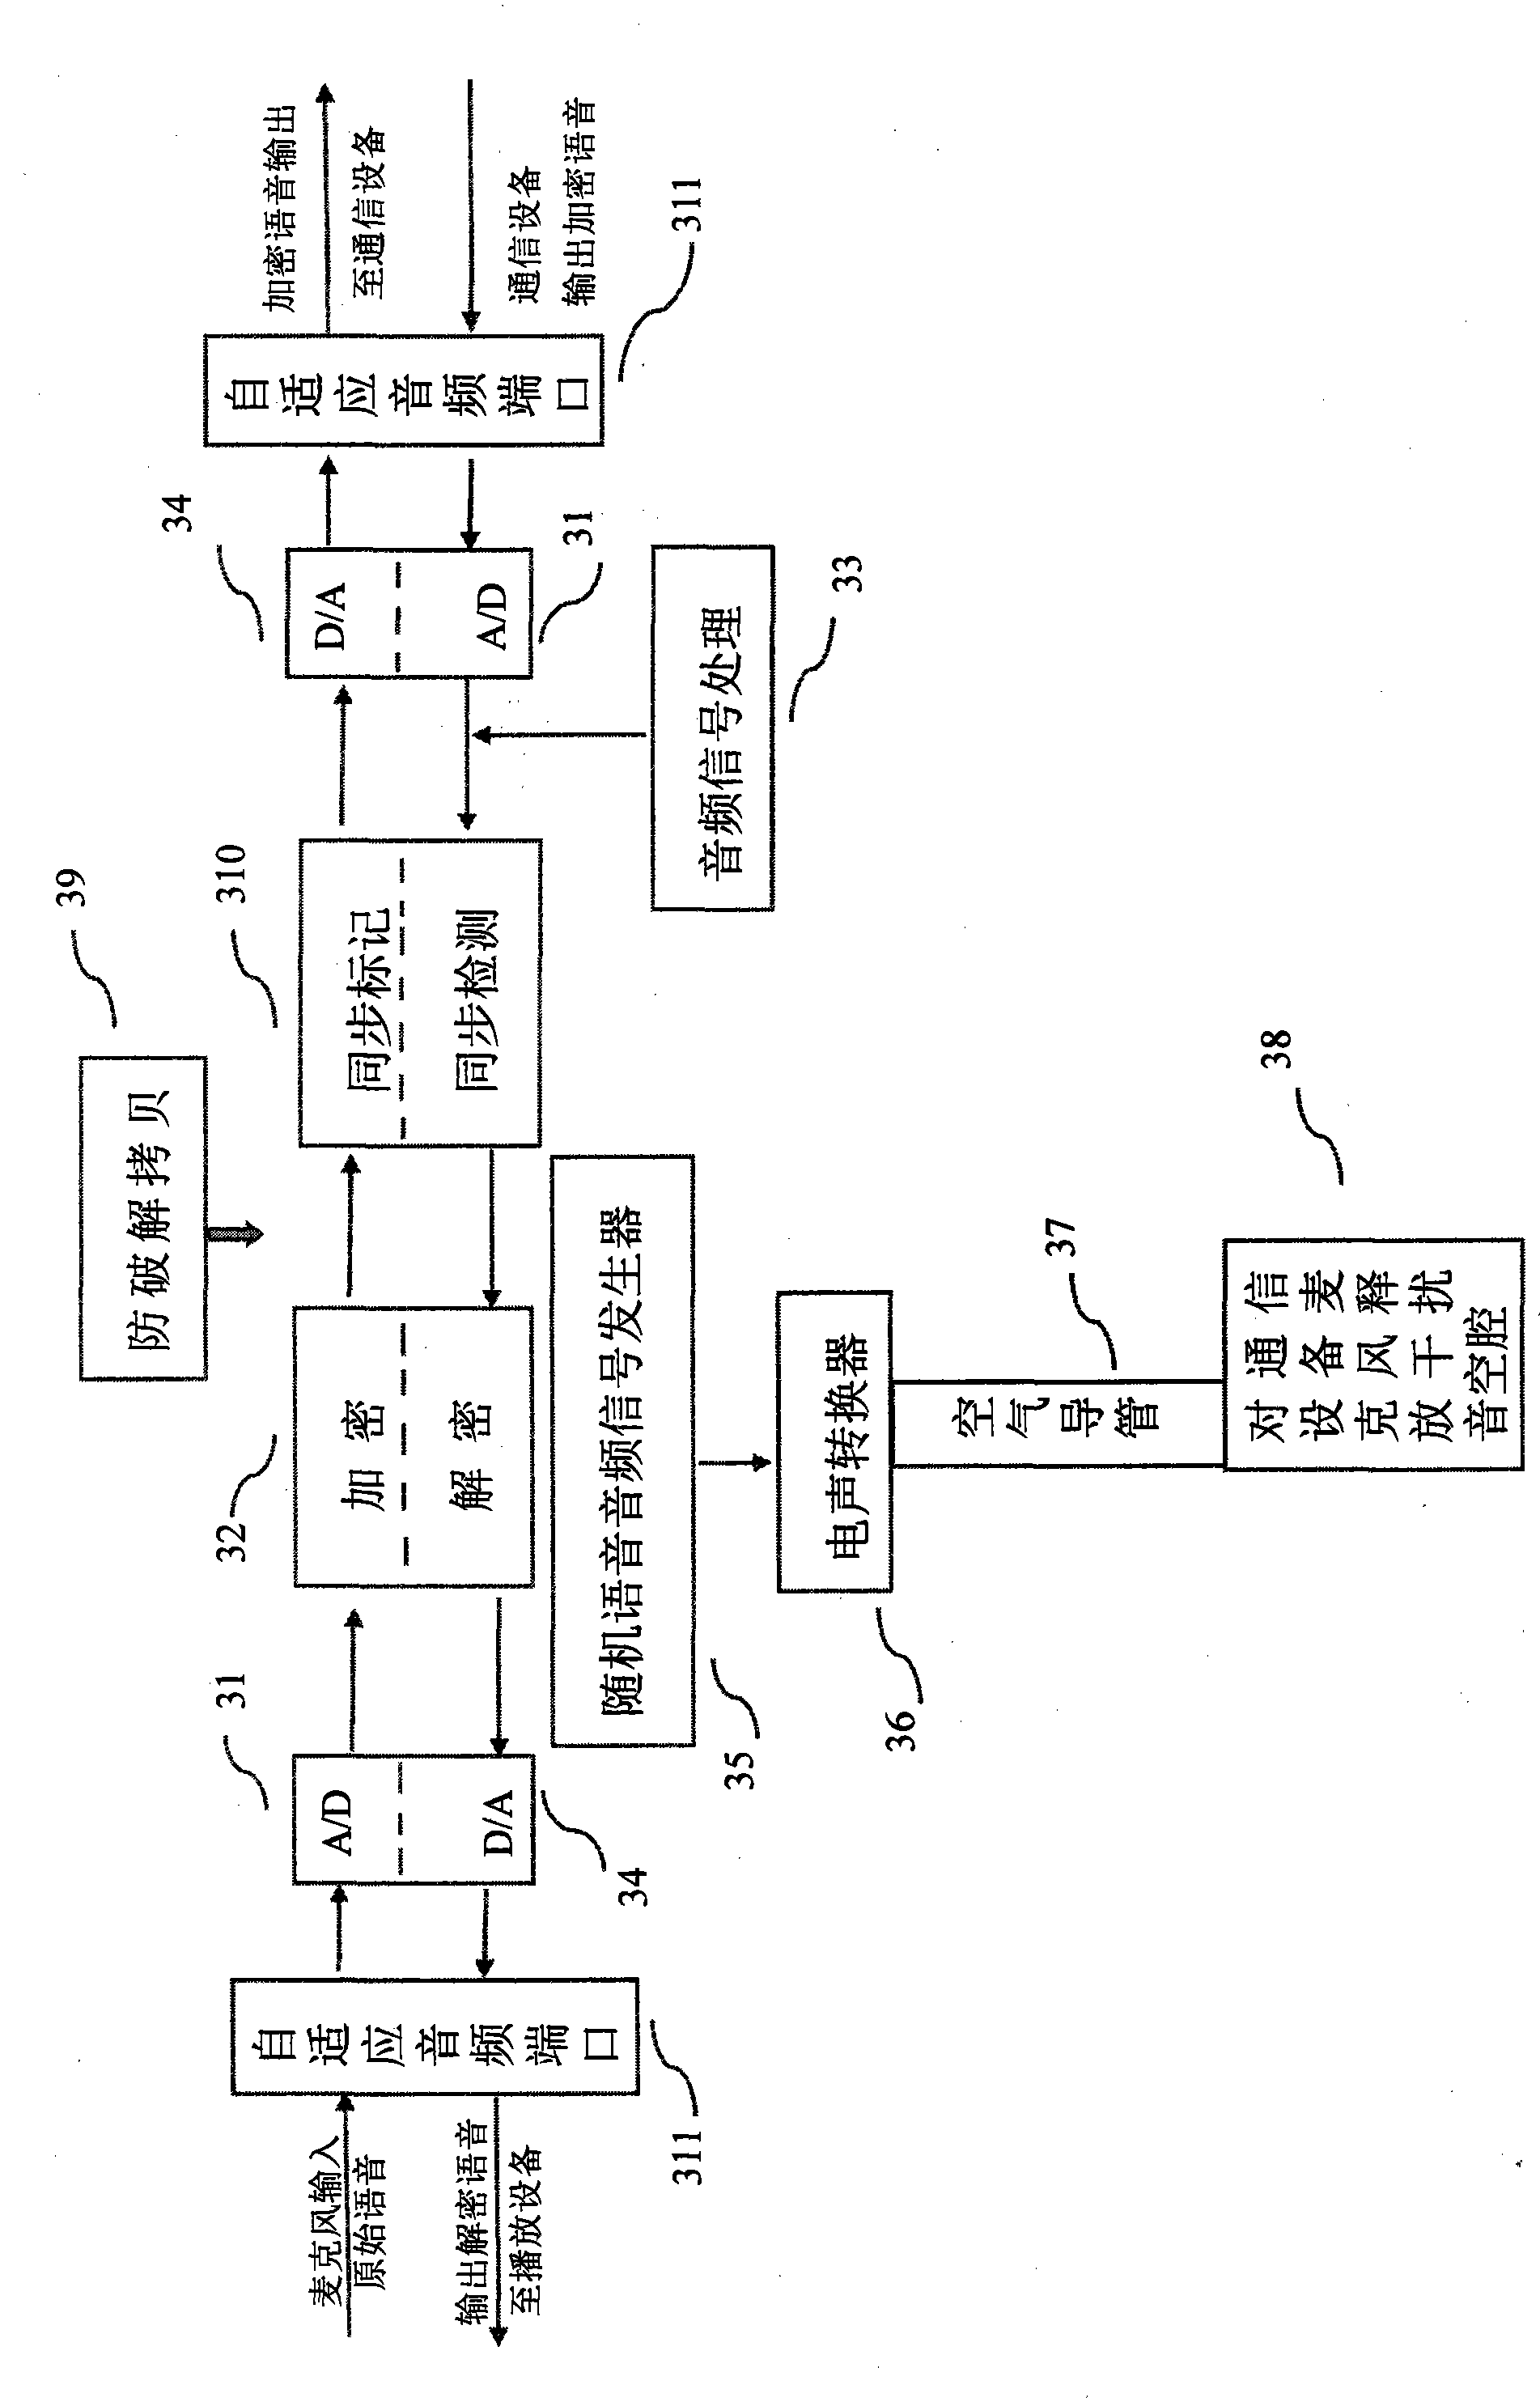 External information source encryption and anti-eavesdrop interference device for voice communication device